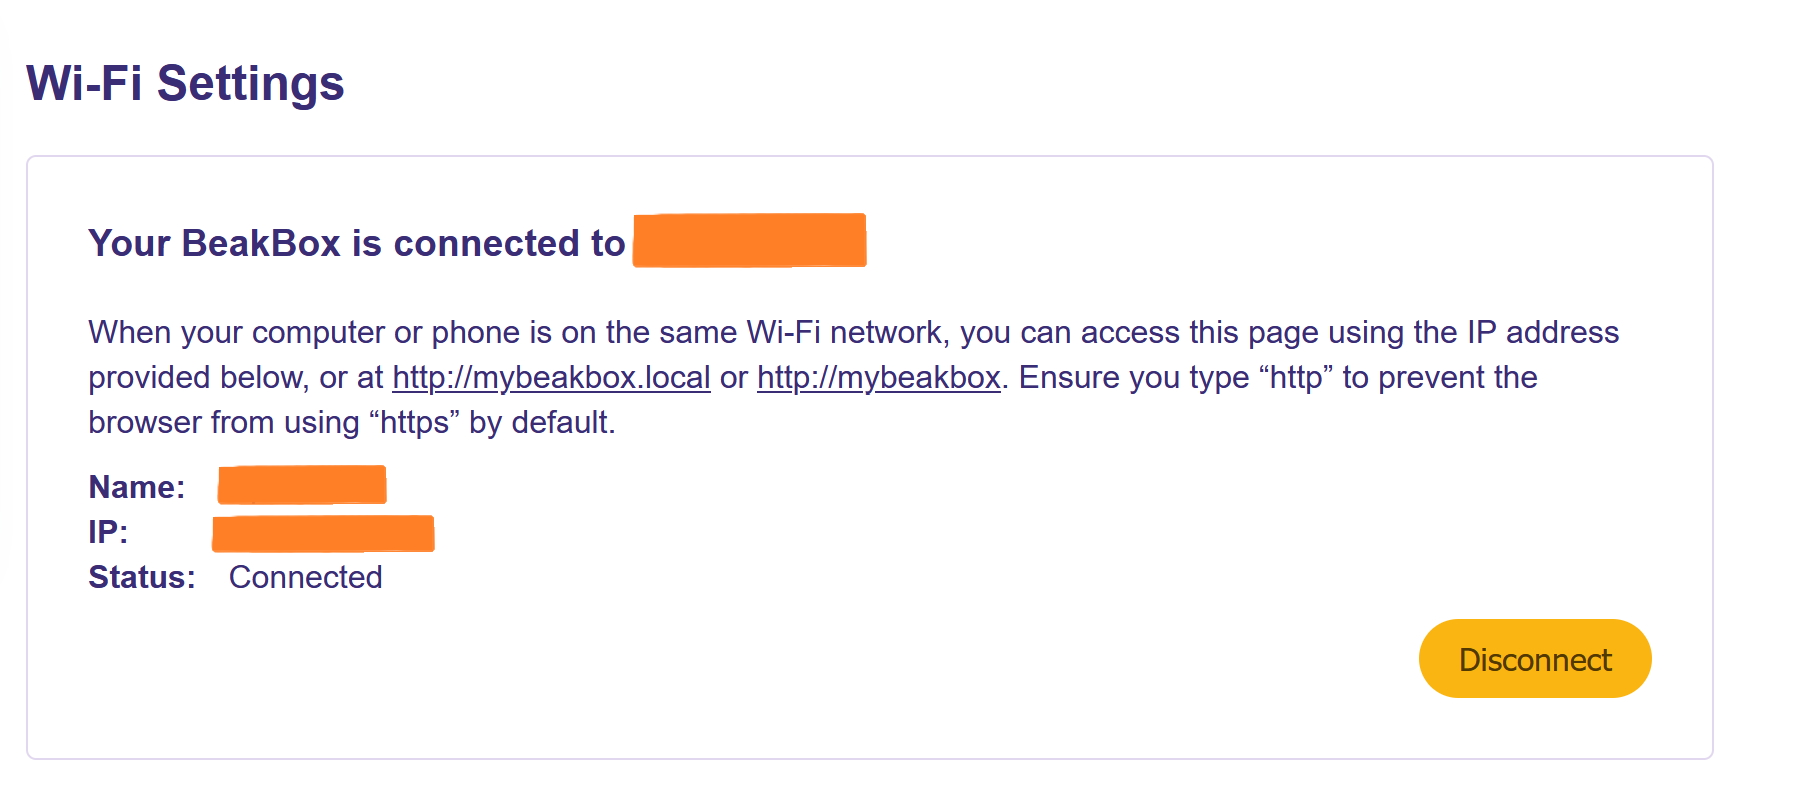 Wi-Fi settings modal showing the success message for the BeakBox connection